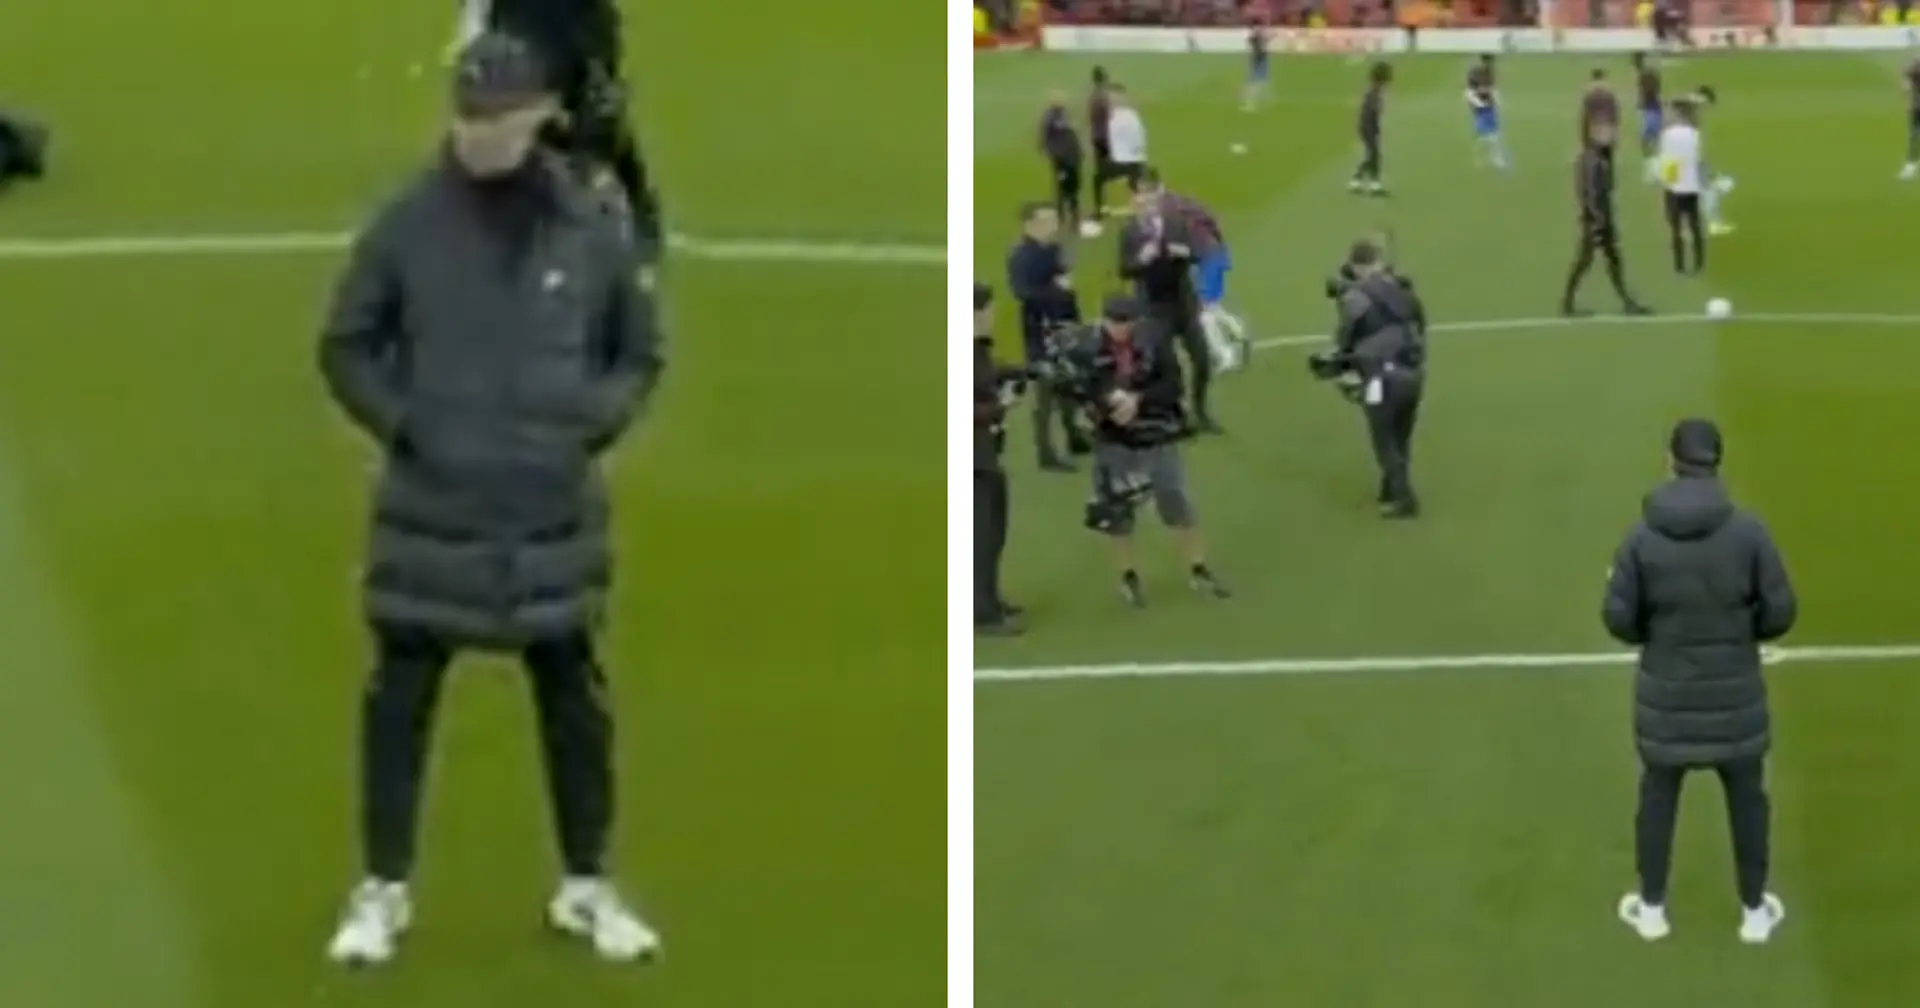 Why was Jurgen Klopp staring at Man United players during warm-up? Explained